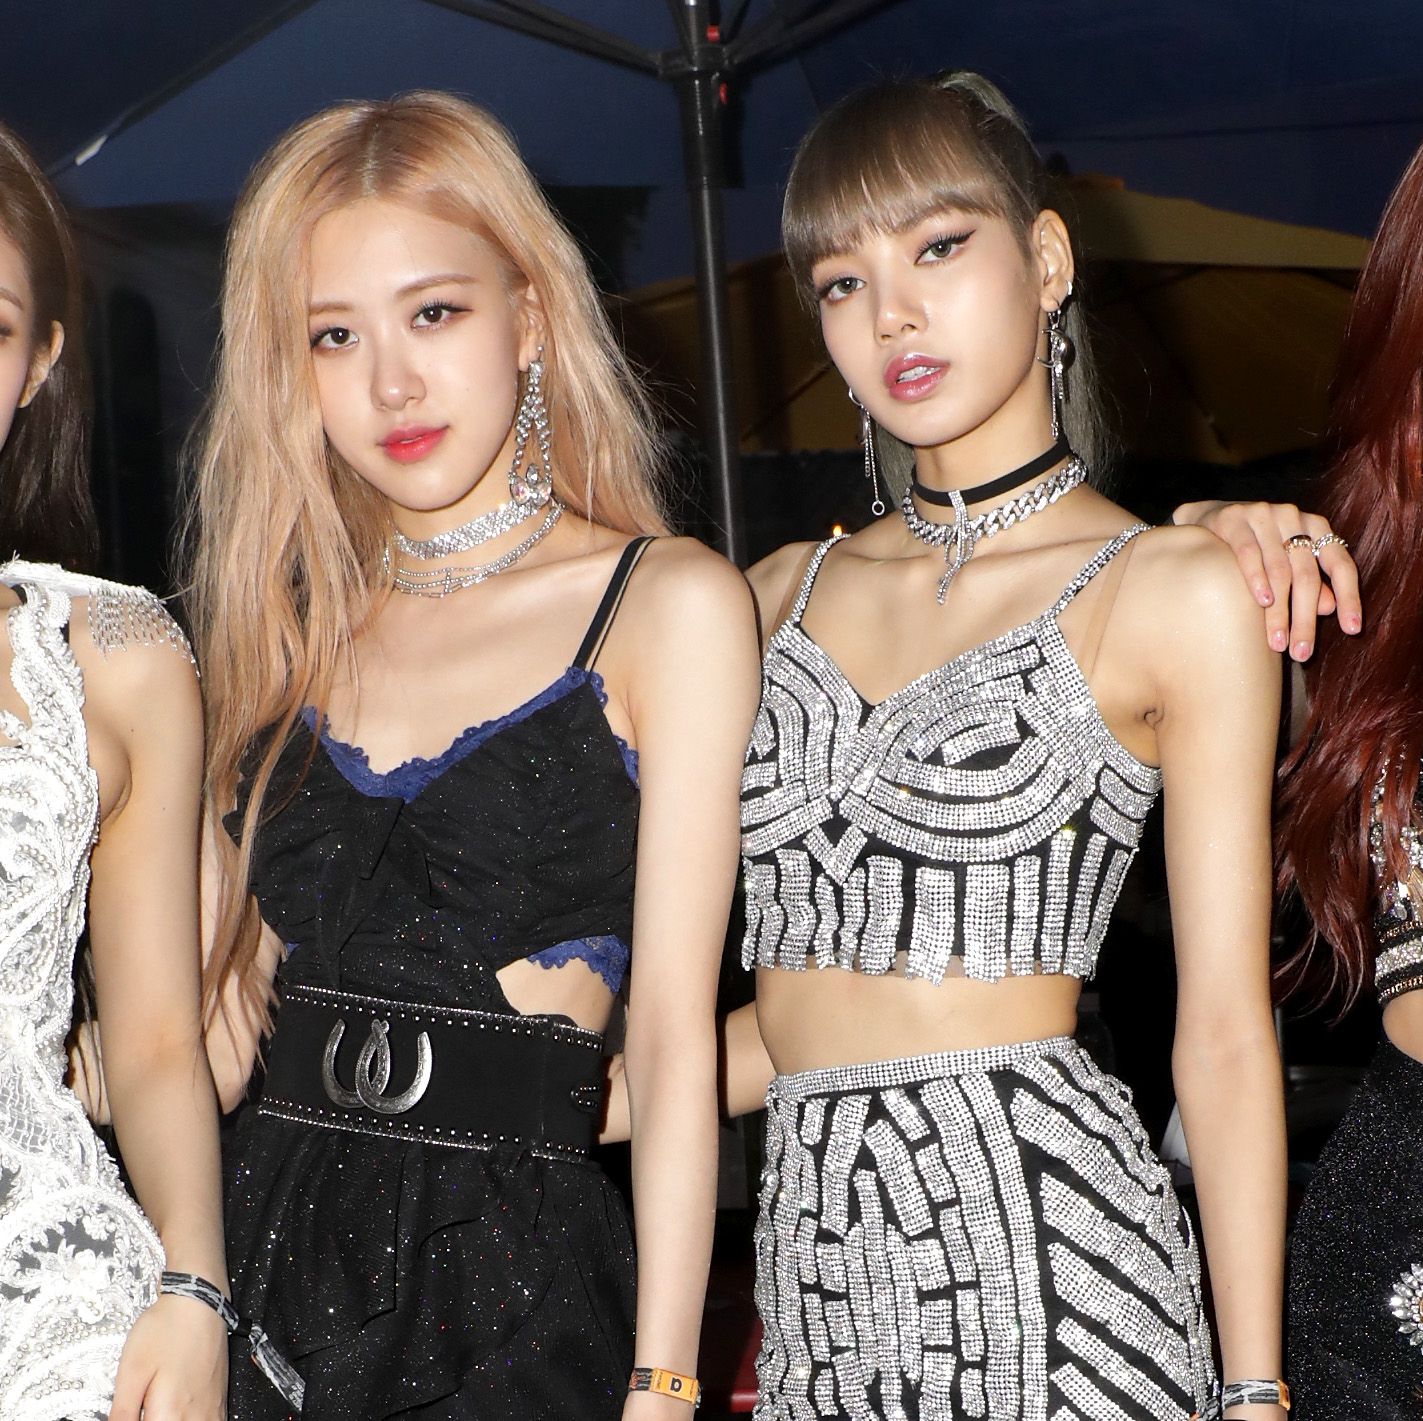 Blackpink’s “Pink Venom” Is a Cheeky Play on Words, and I’m Obsessed